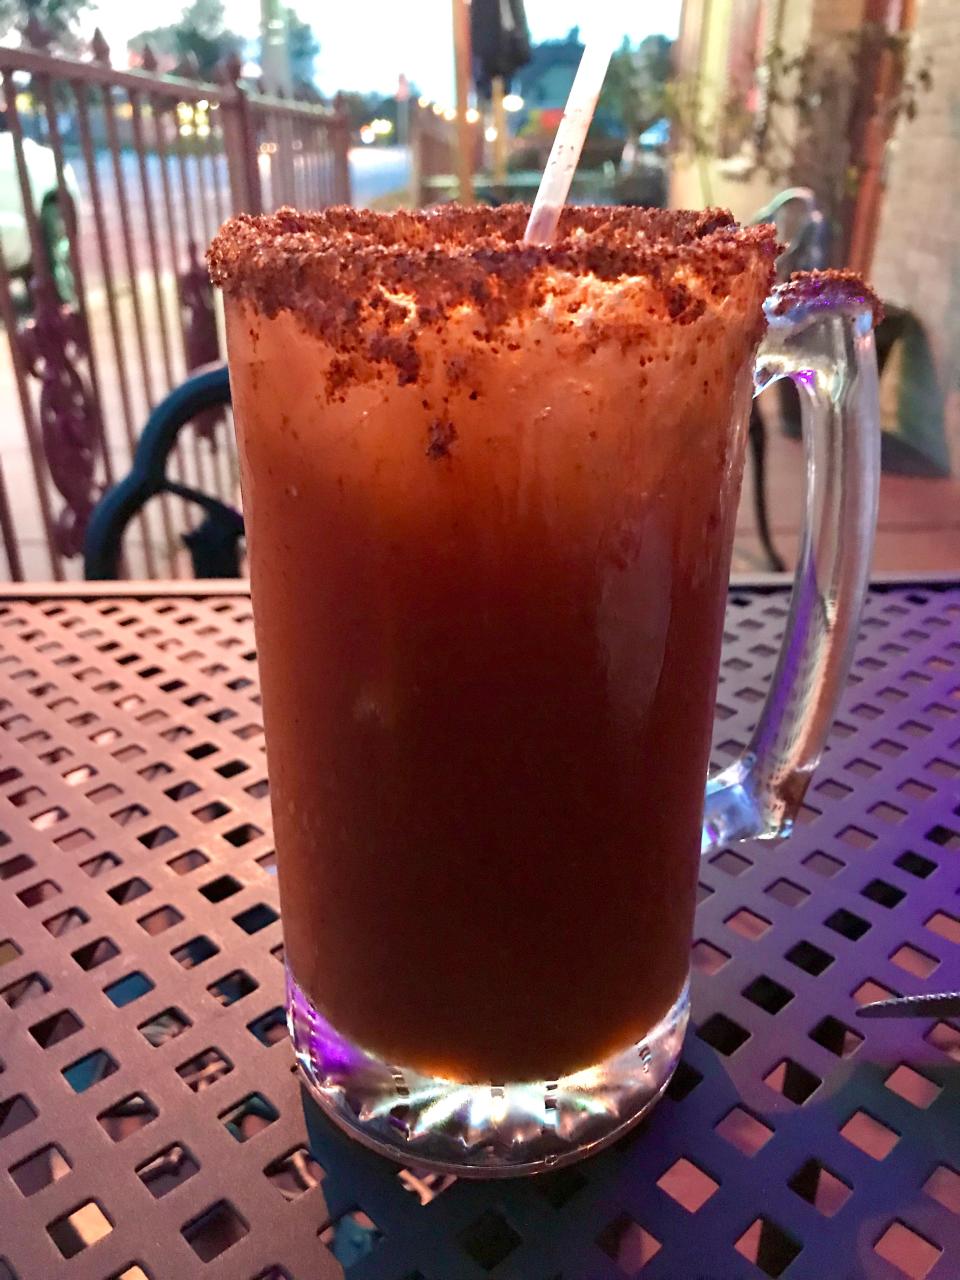 A Tajin-crusted rim of the michelada at Tu Casa Mexican Restaurant, 3710 W. Lincoln Ave., flavors sips of the drink.